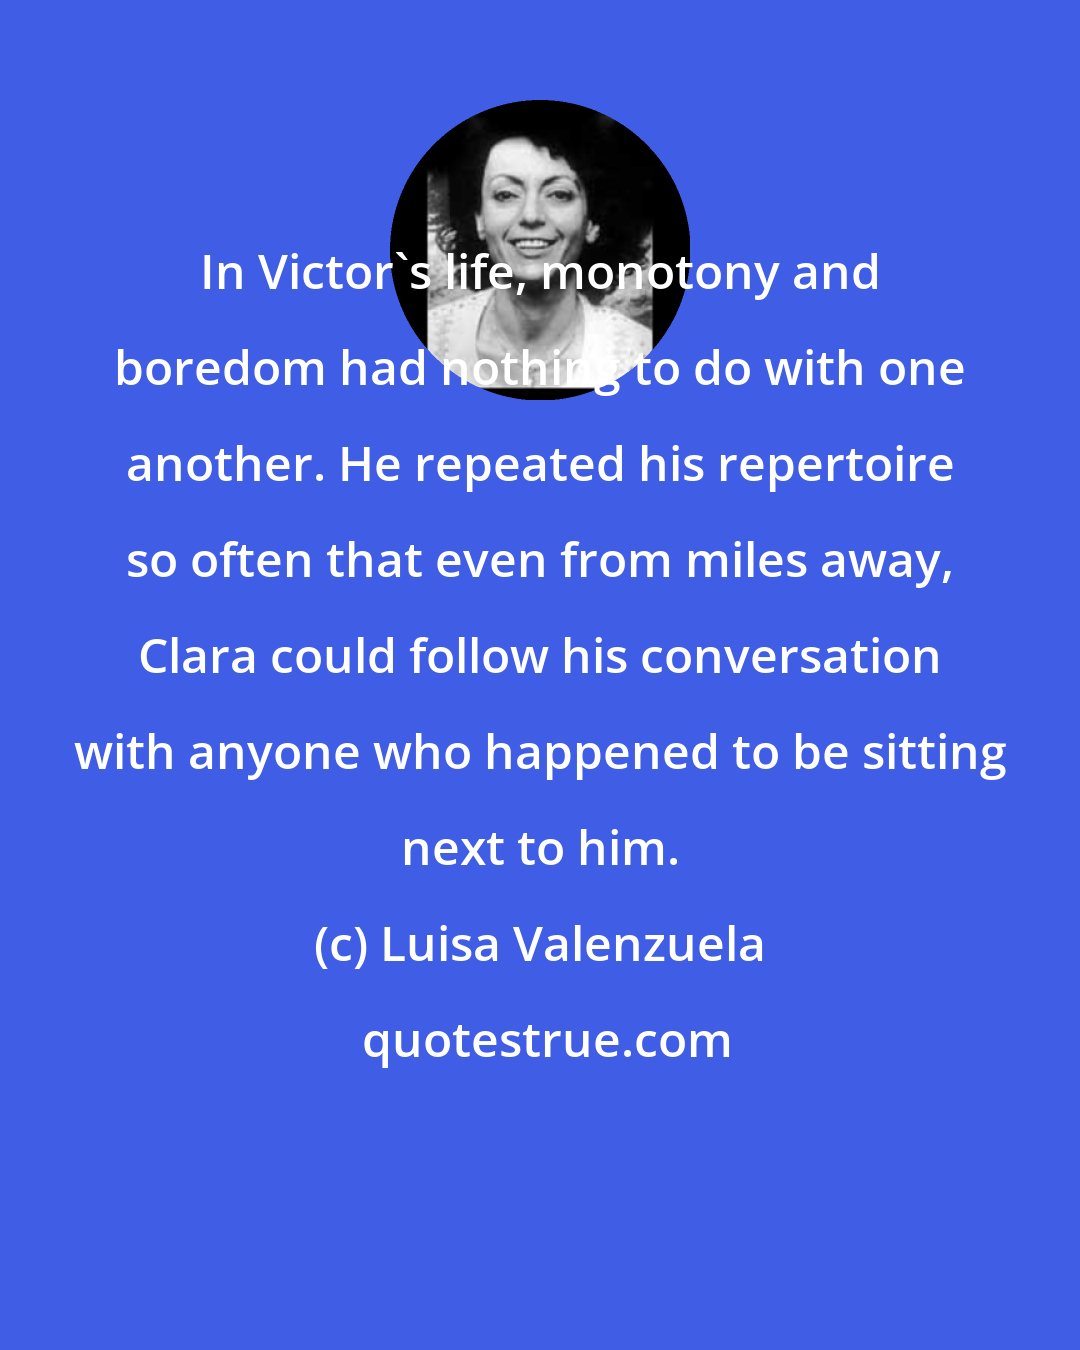 Luisa Valenzuela: In Victor's life, monotony and boredom had nothing to do with one another. He repeated his repertoire so often that even from miles away, Clara could follow his conversation with anyone who happened to be sitting next to him.